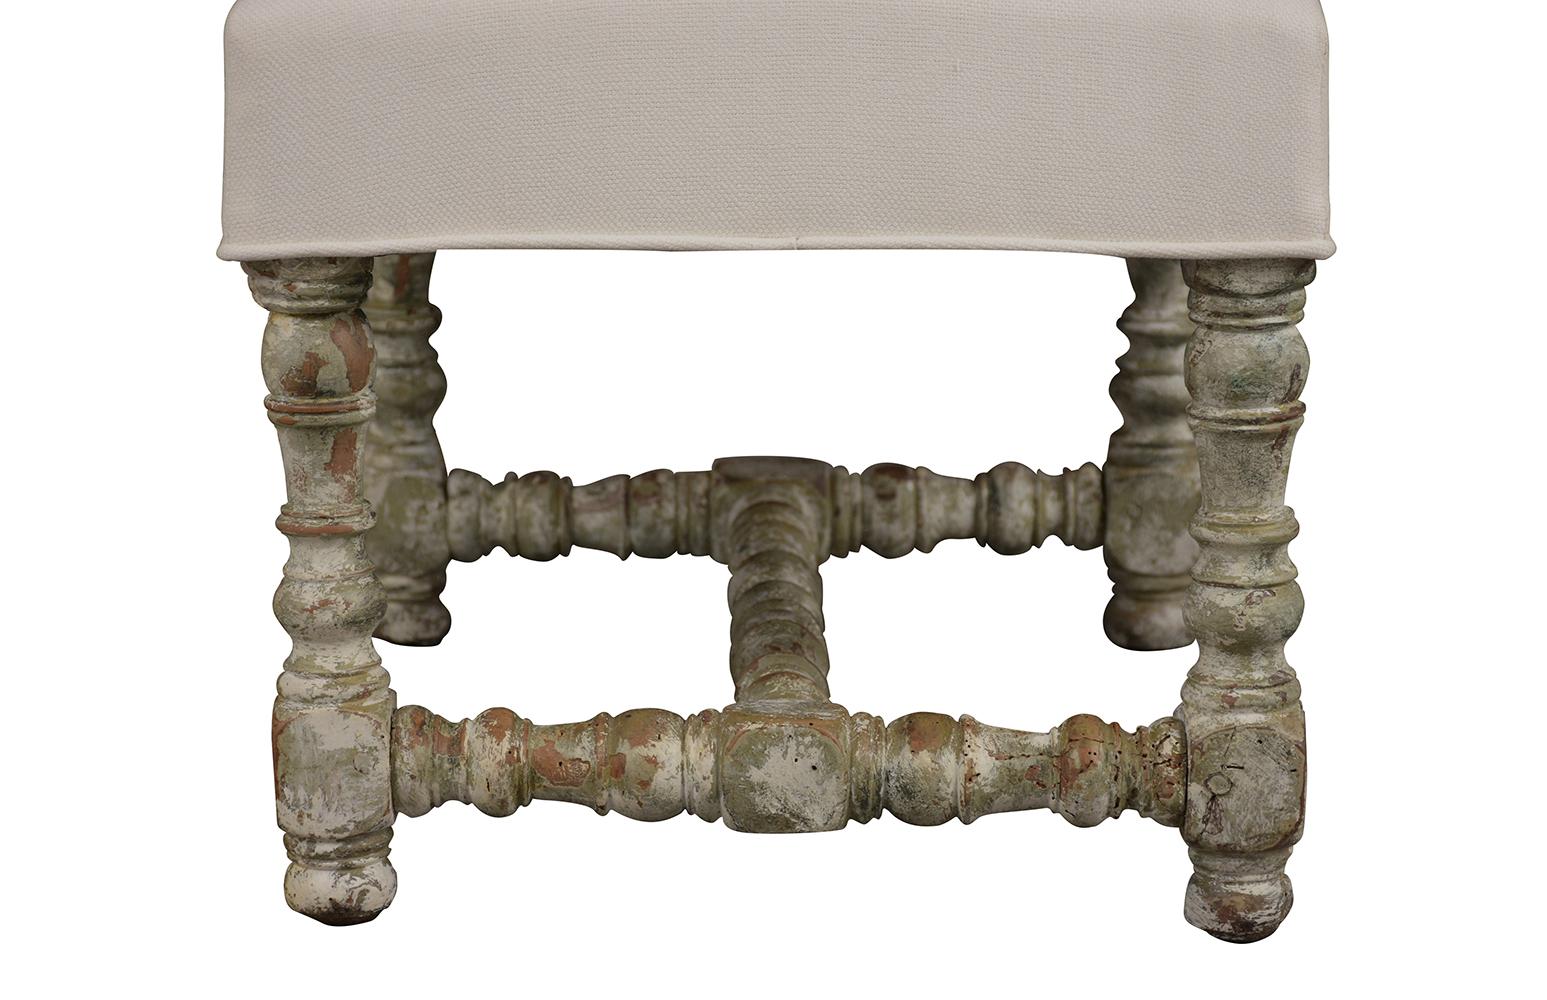 This 1860s antique carved foot stools are in remarkable condition. The carved wood frame is finished in a pale grey and off-white color combination with a distressed finish. The seat has recently been professionally upholstered in an off white